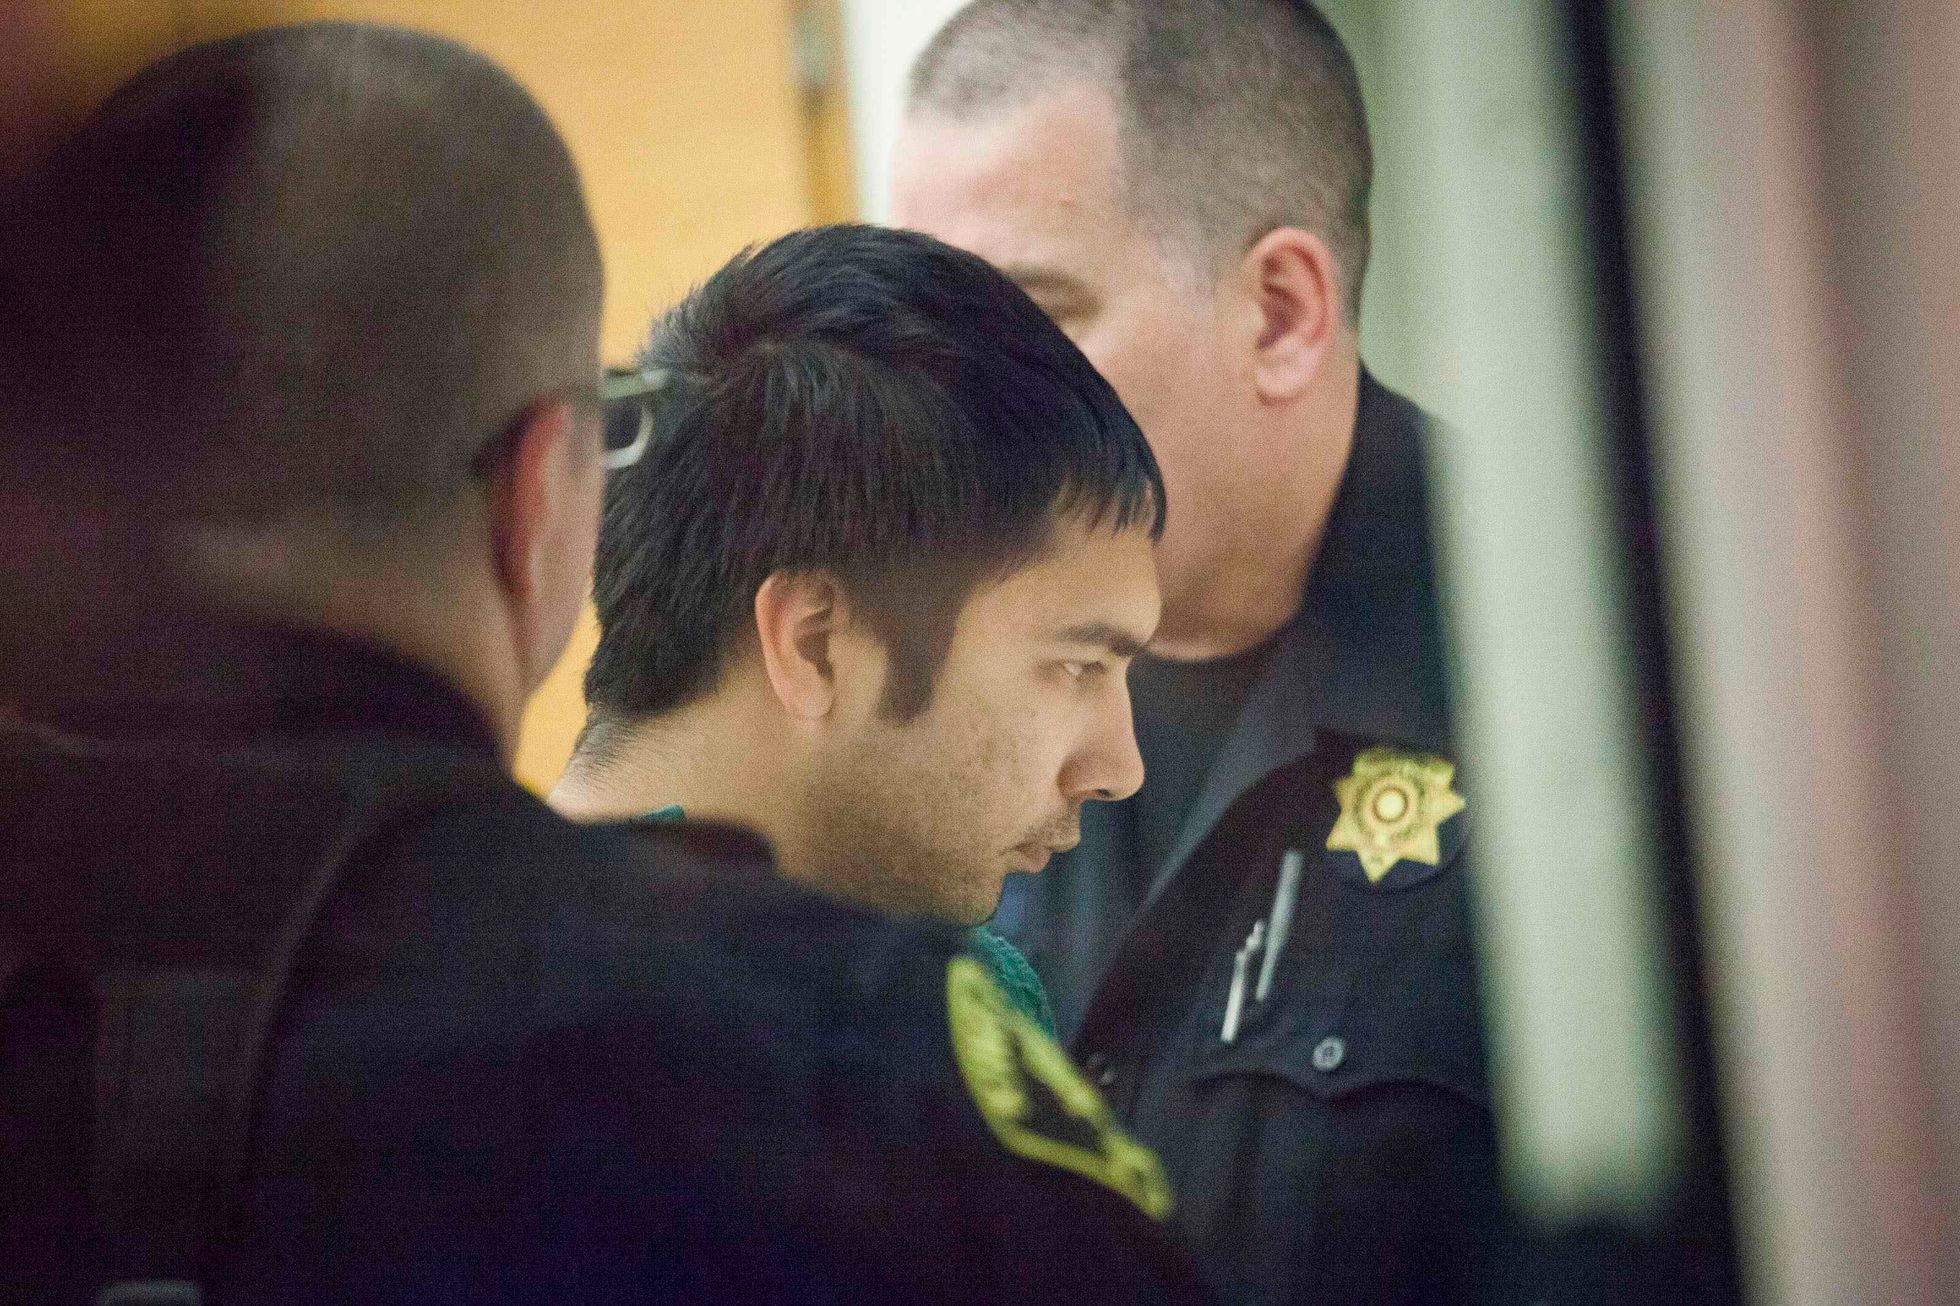 Shooting suspect Ybarra appears in court at the King County Jail in Seattle